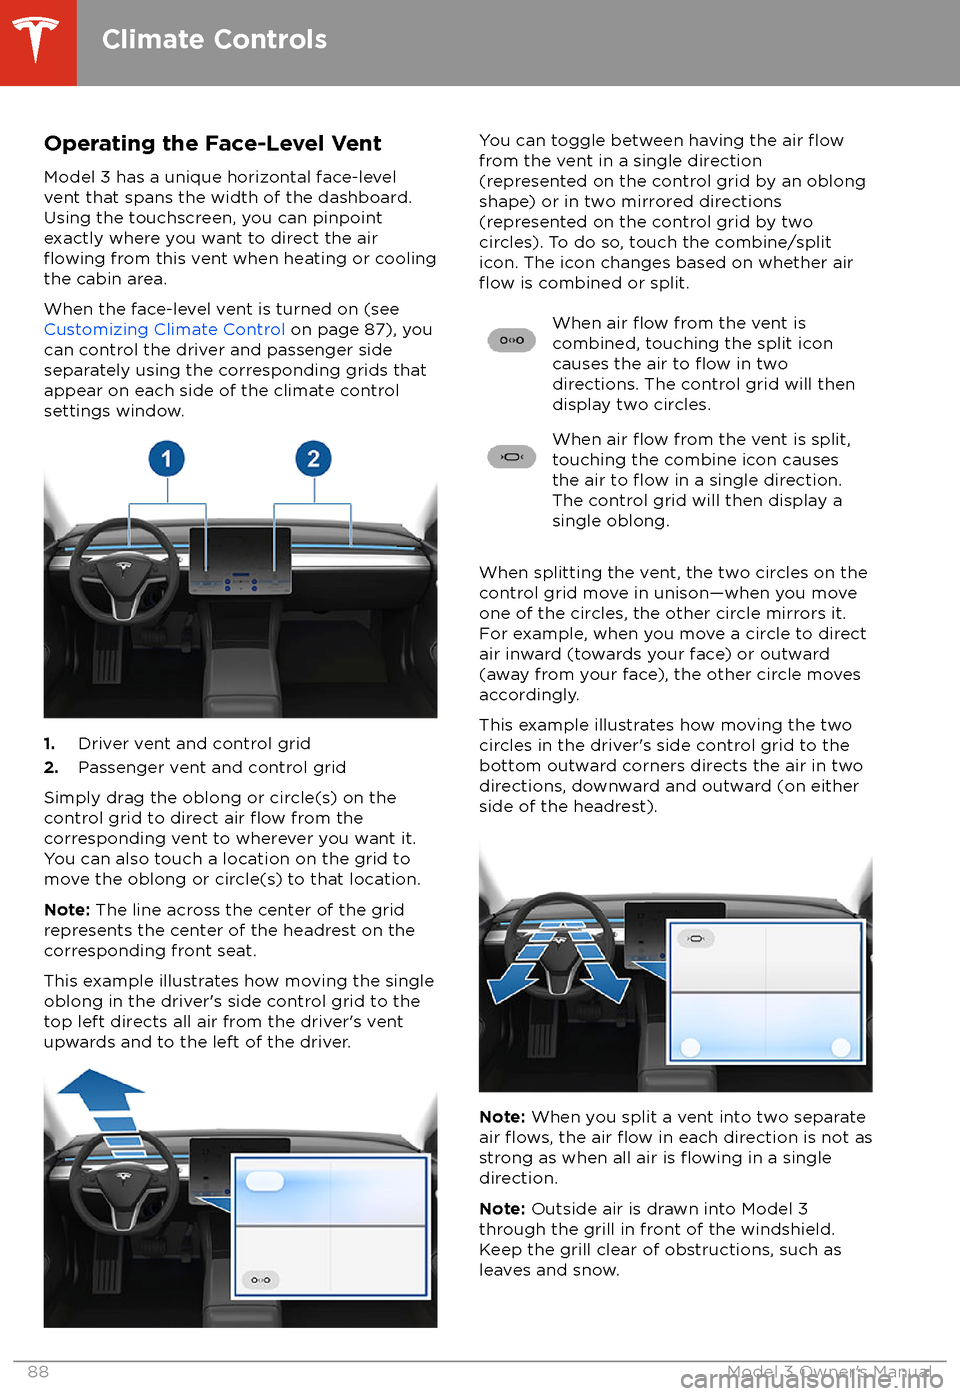 TESLA MODEL 3 2018  Owners Manual Operating the Face-Level Vent
Model 3 has a unique horizontal face-level
vent that spans the width of the dashboard.
Using the touchscreen, you can pinpoint
exactly where you want to direct the air
fl